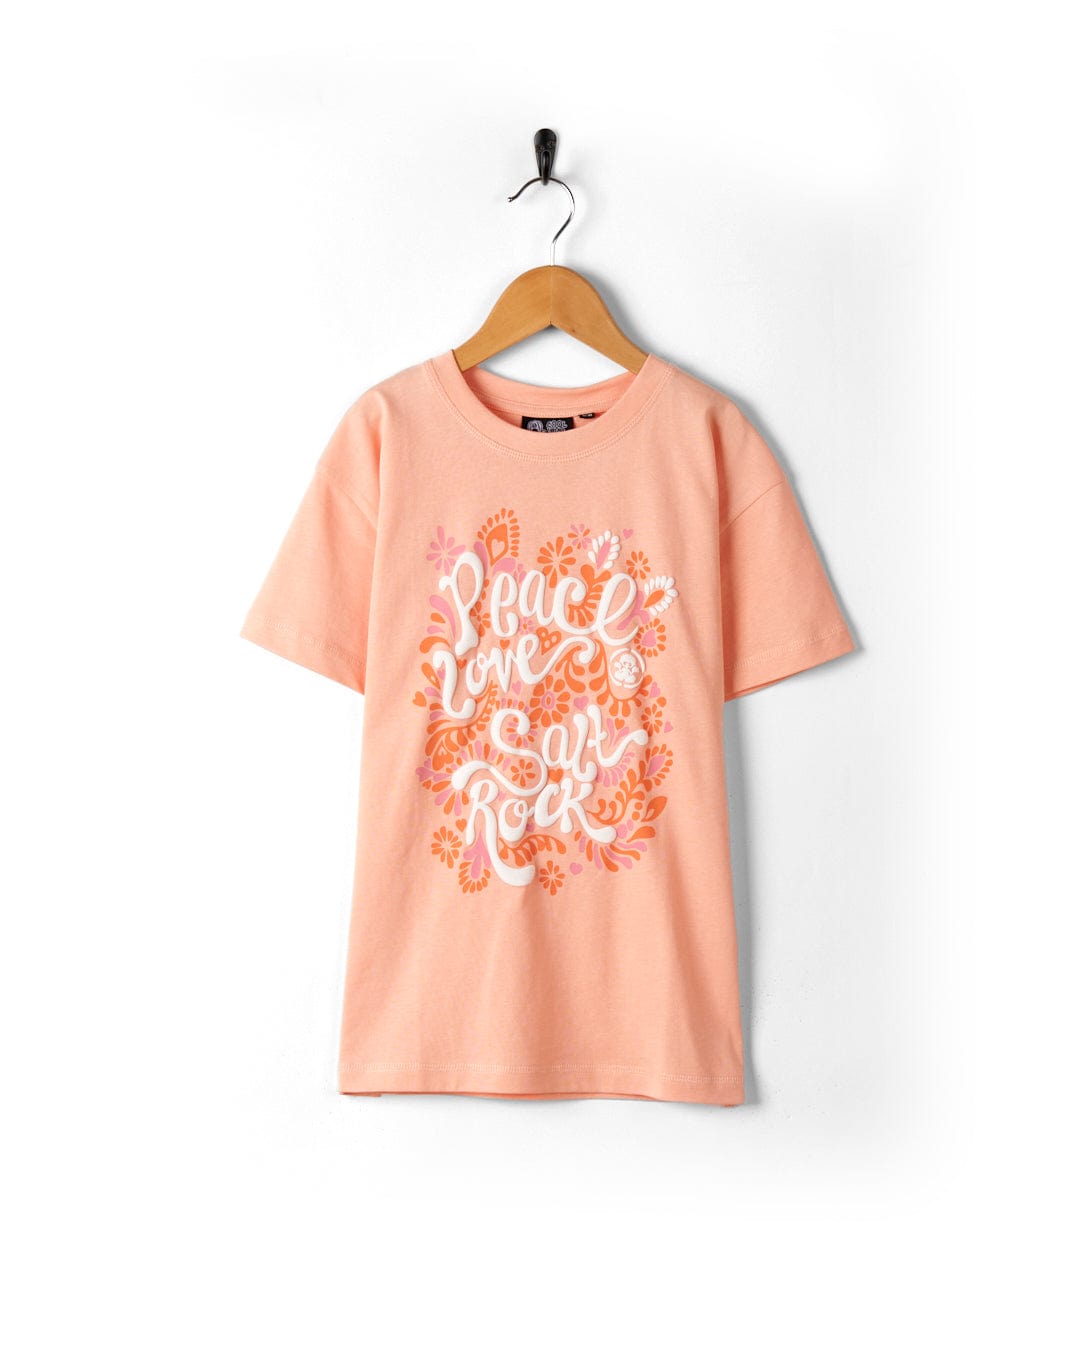 Saltrock Peach cotton t-shirt with "peace love rock" graphic design, hung on a hanger against a white background.